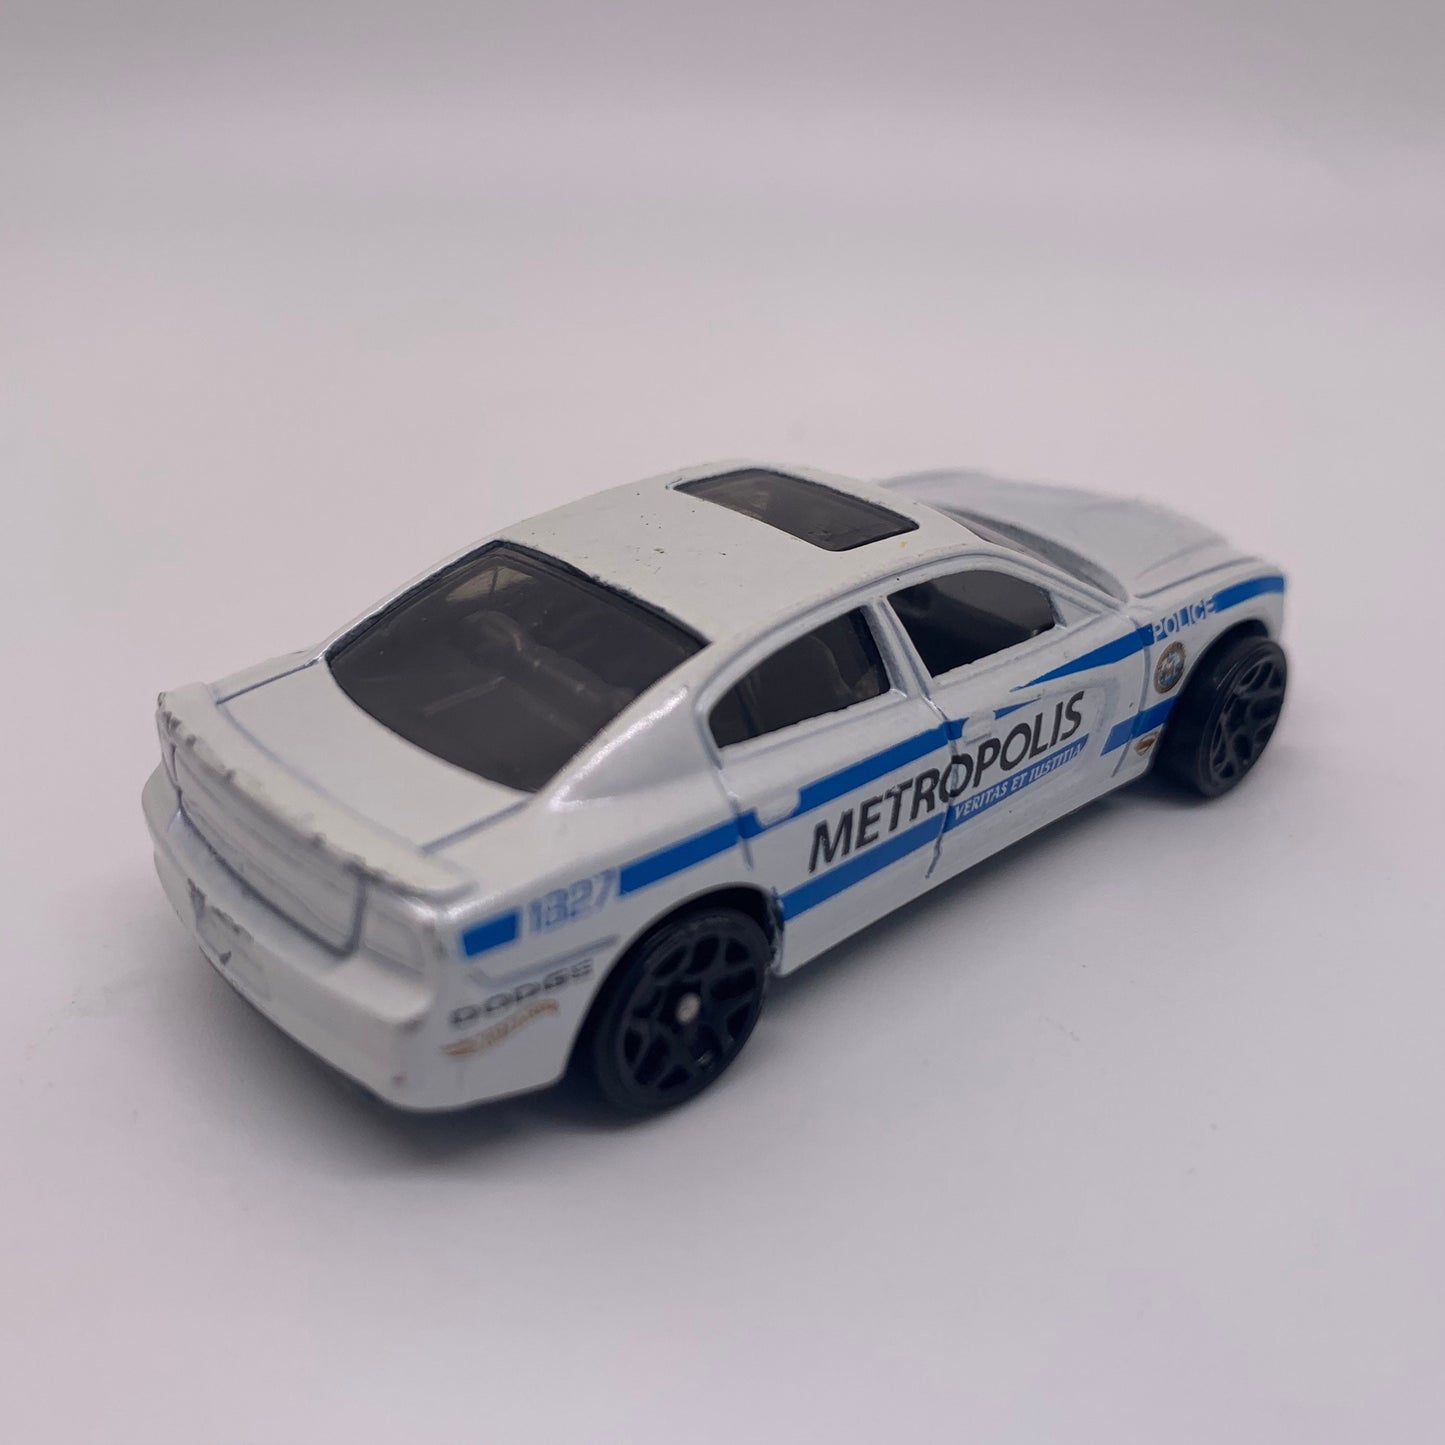 Metropolis Police Dodge Charger RT White and Blue Hot Wheels Diecast Metal Miniature Model Toy Car